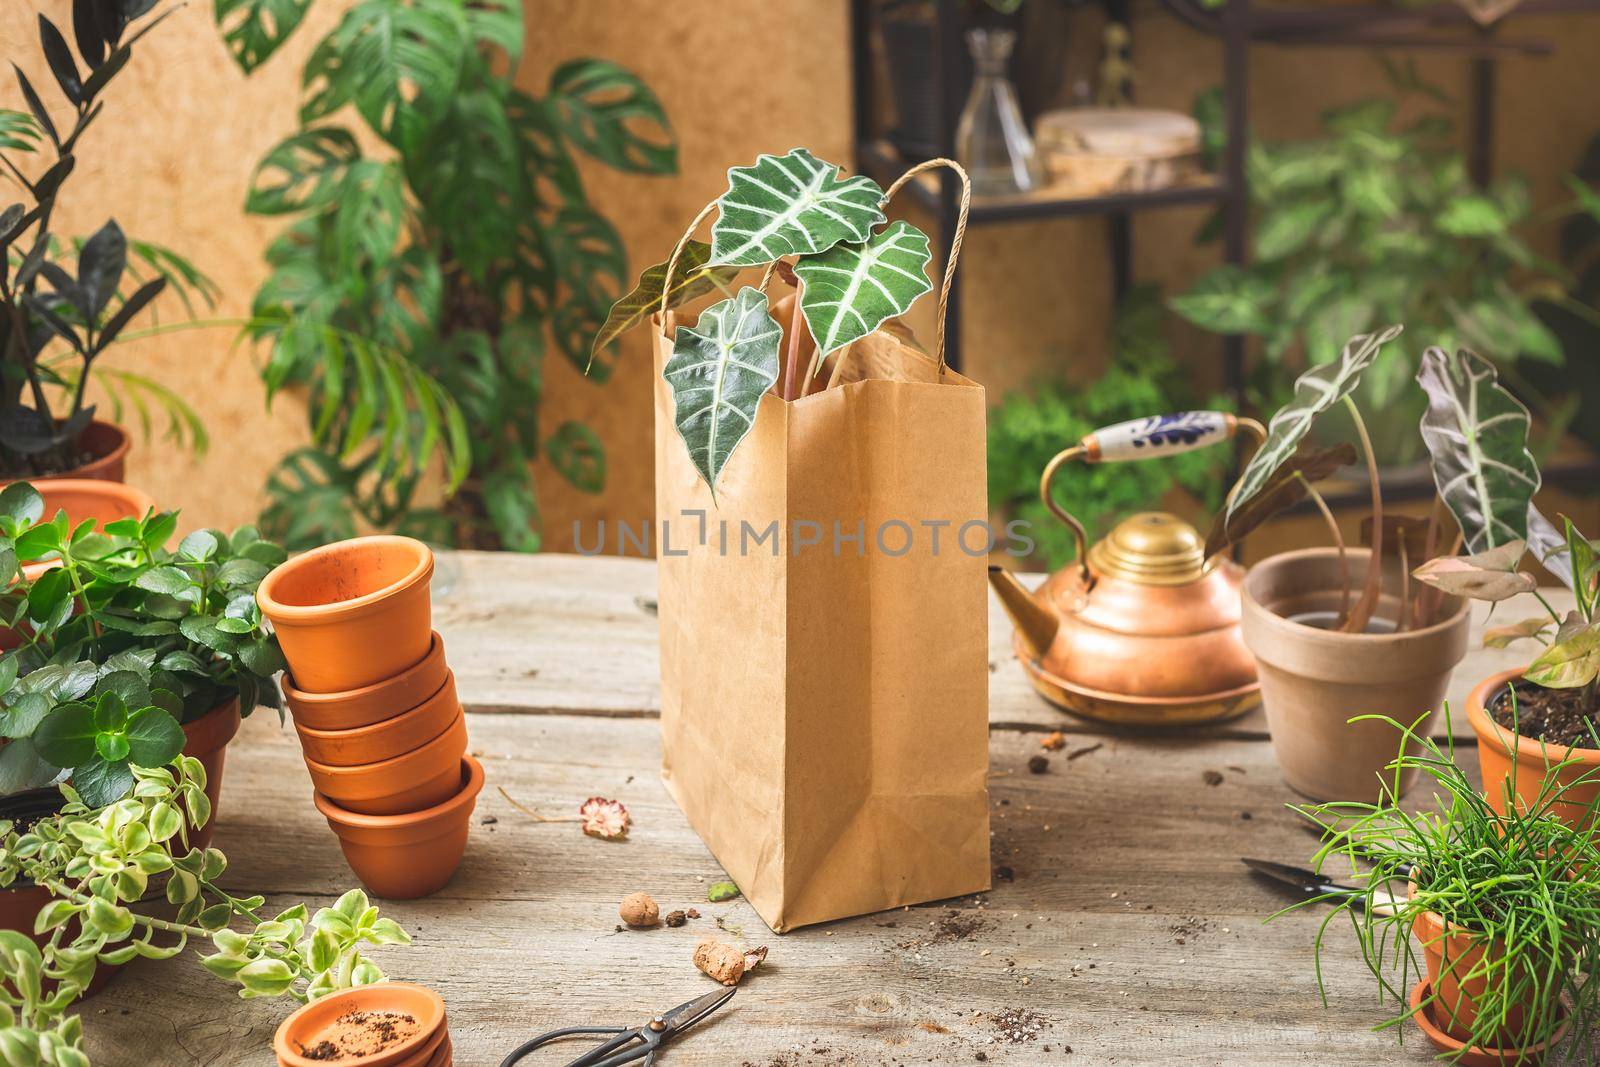 Paper bag with alocasia plant ready to be delivered. Small nursery or plant shop business. Selling plants from home